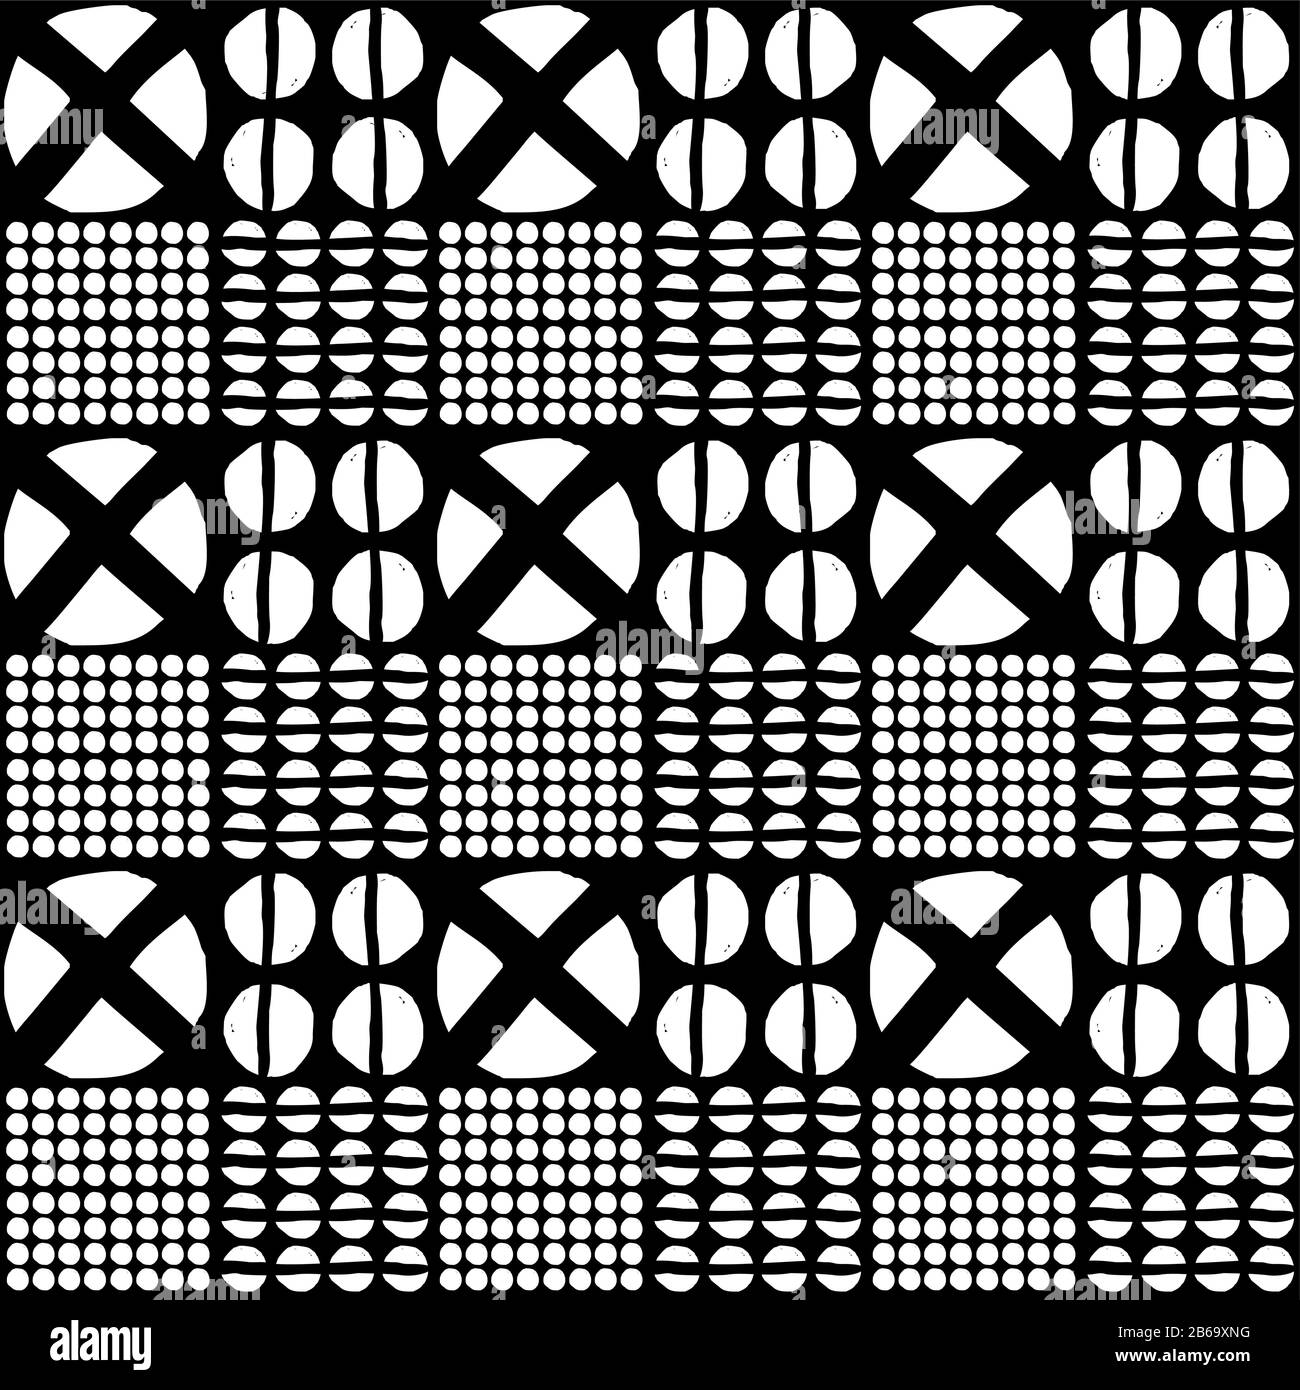 Vector seamless geometric black and white pattern of hand-drawn crossed circles. For decor, textile, fabric, carpet, wallpaper, ceramic tiles, wrappin Stock Vector